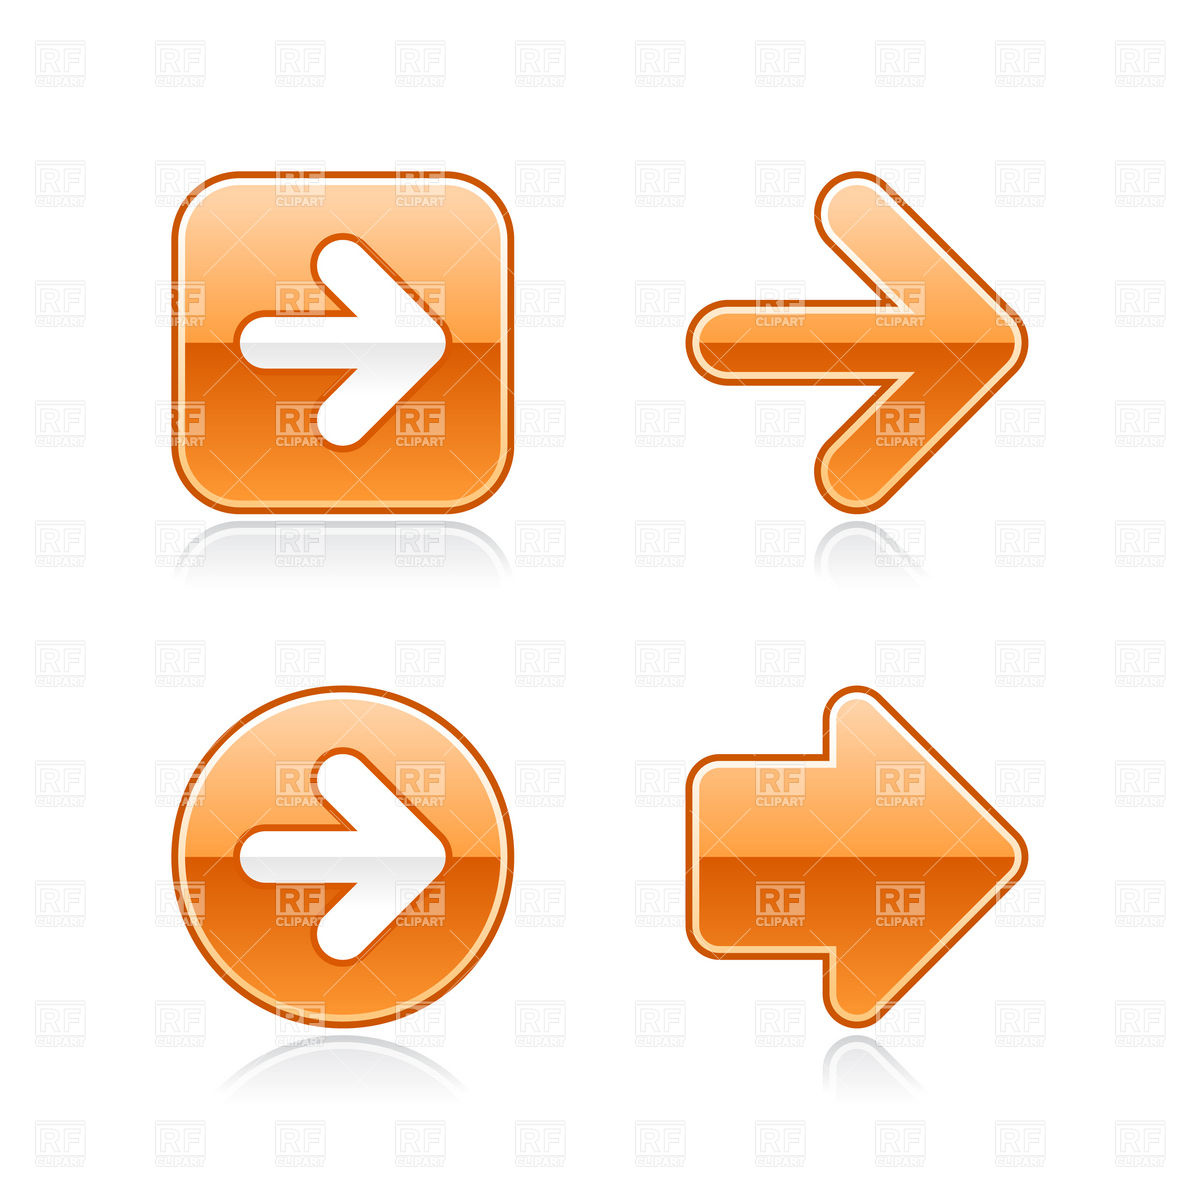 Orange Buttons With Arrow 13850 Download Royalty Free Vector Clipart